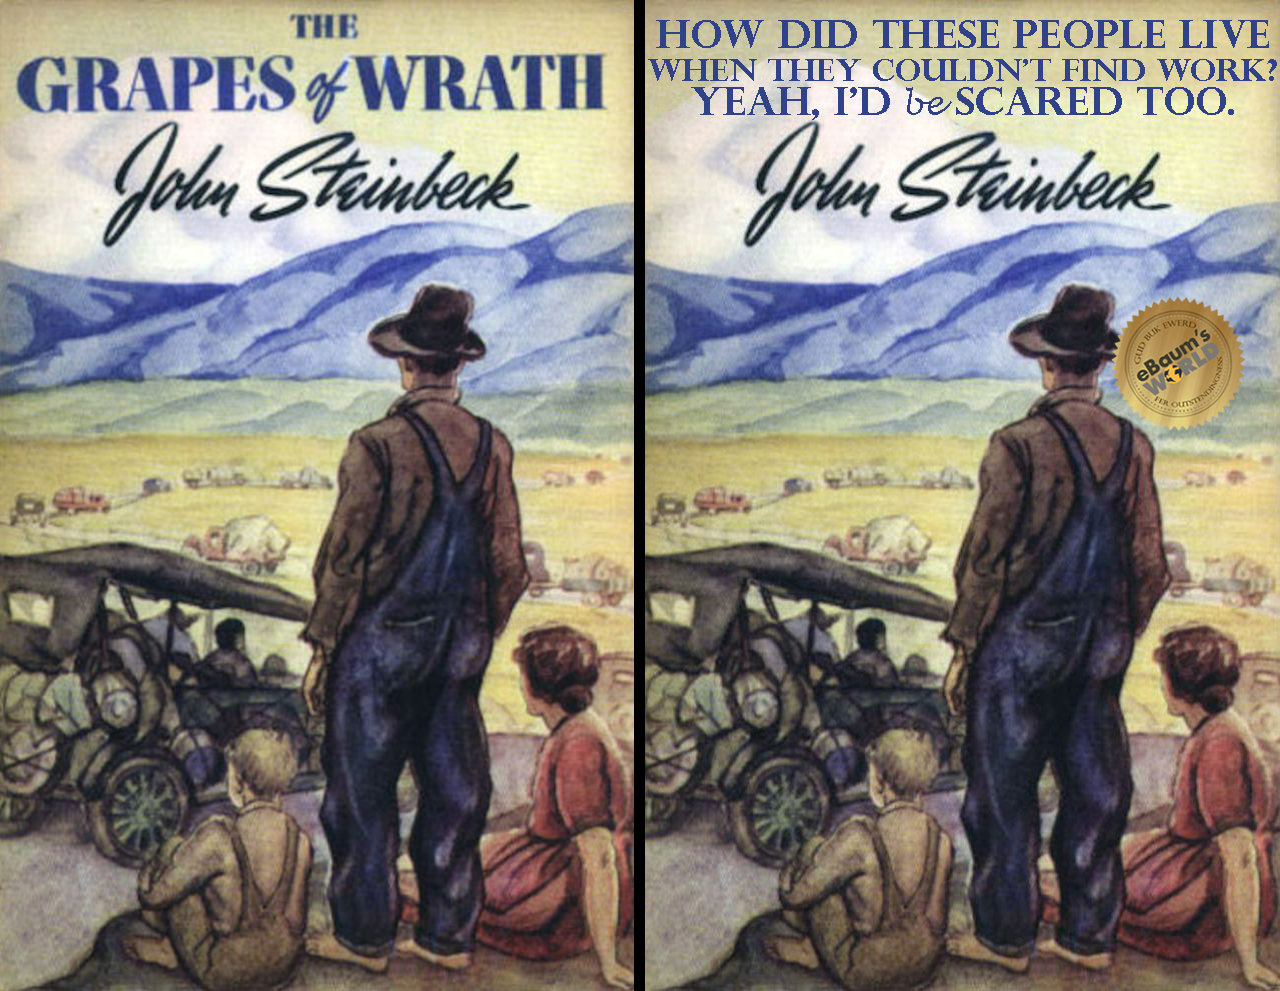 literature during the great depression - The How Did These People Live When They Couldn'T Find Work? Yeah, I'D be Scared Too. Grapes Fwrath Jolen Steinbeck John Steinbeck